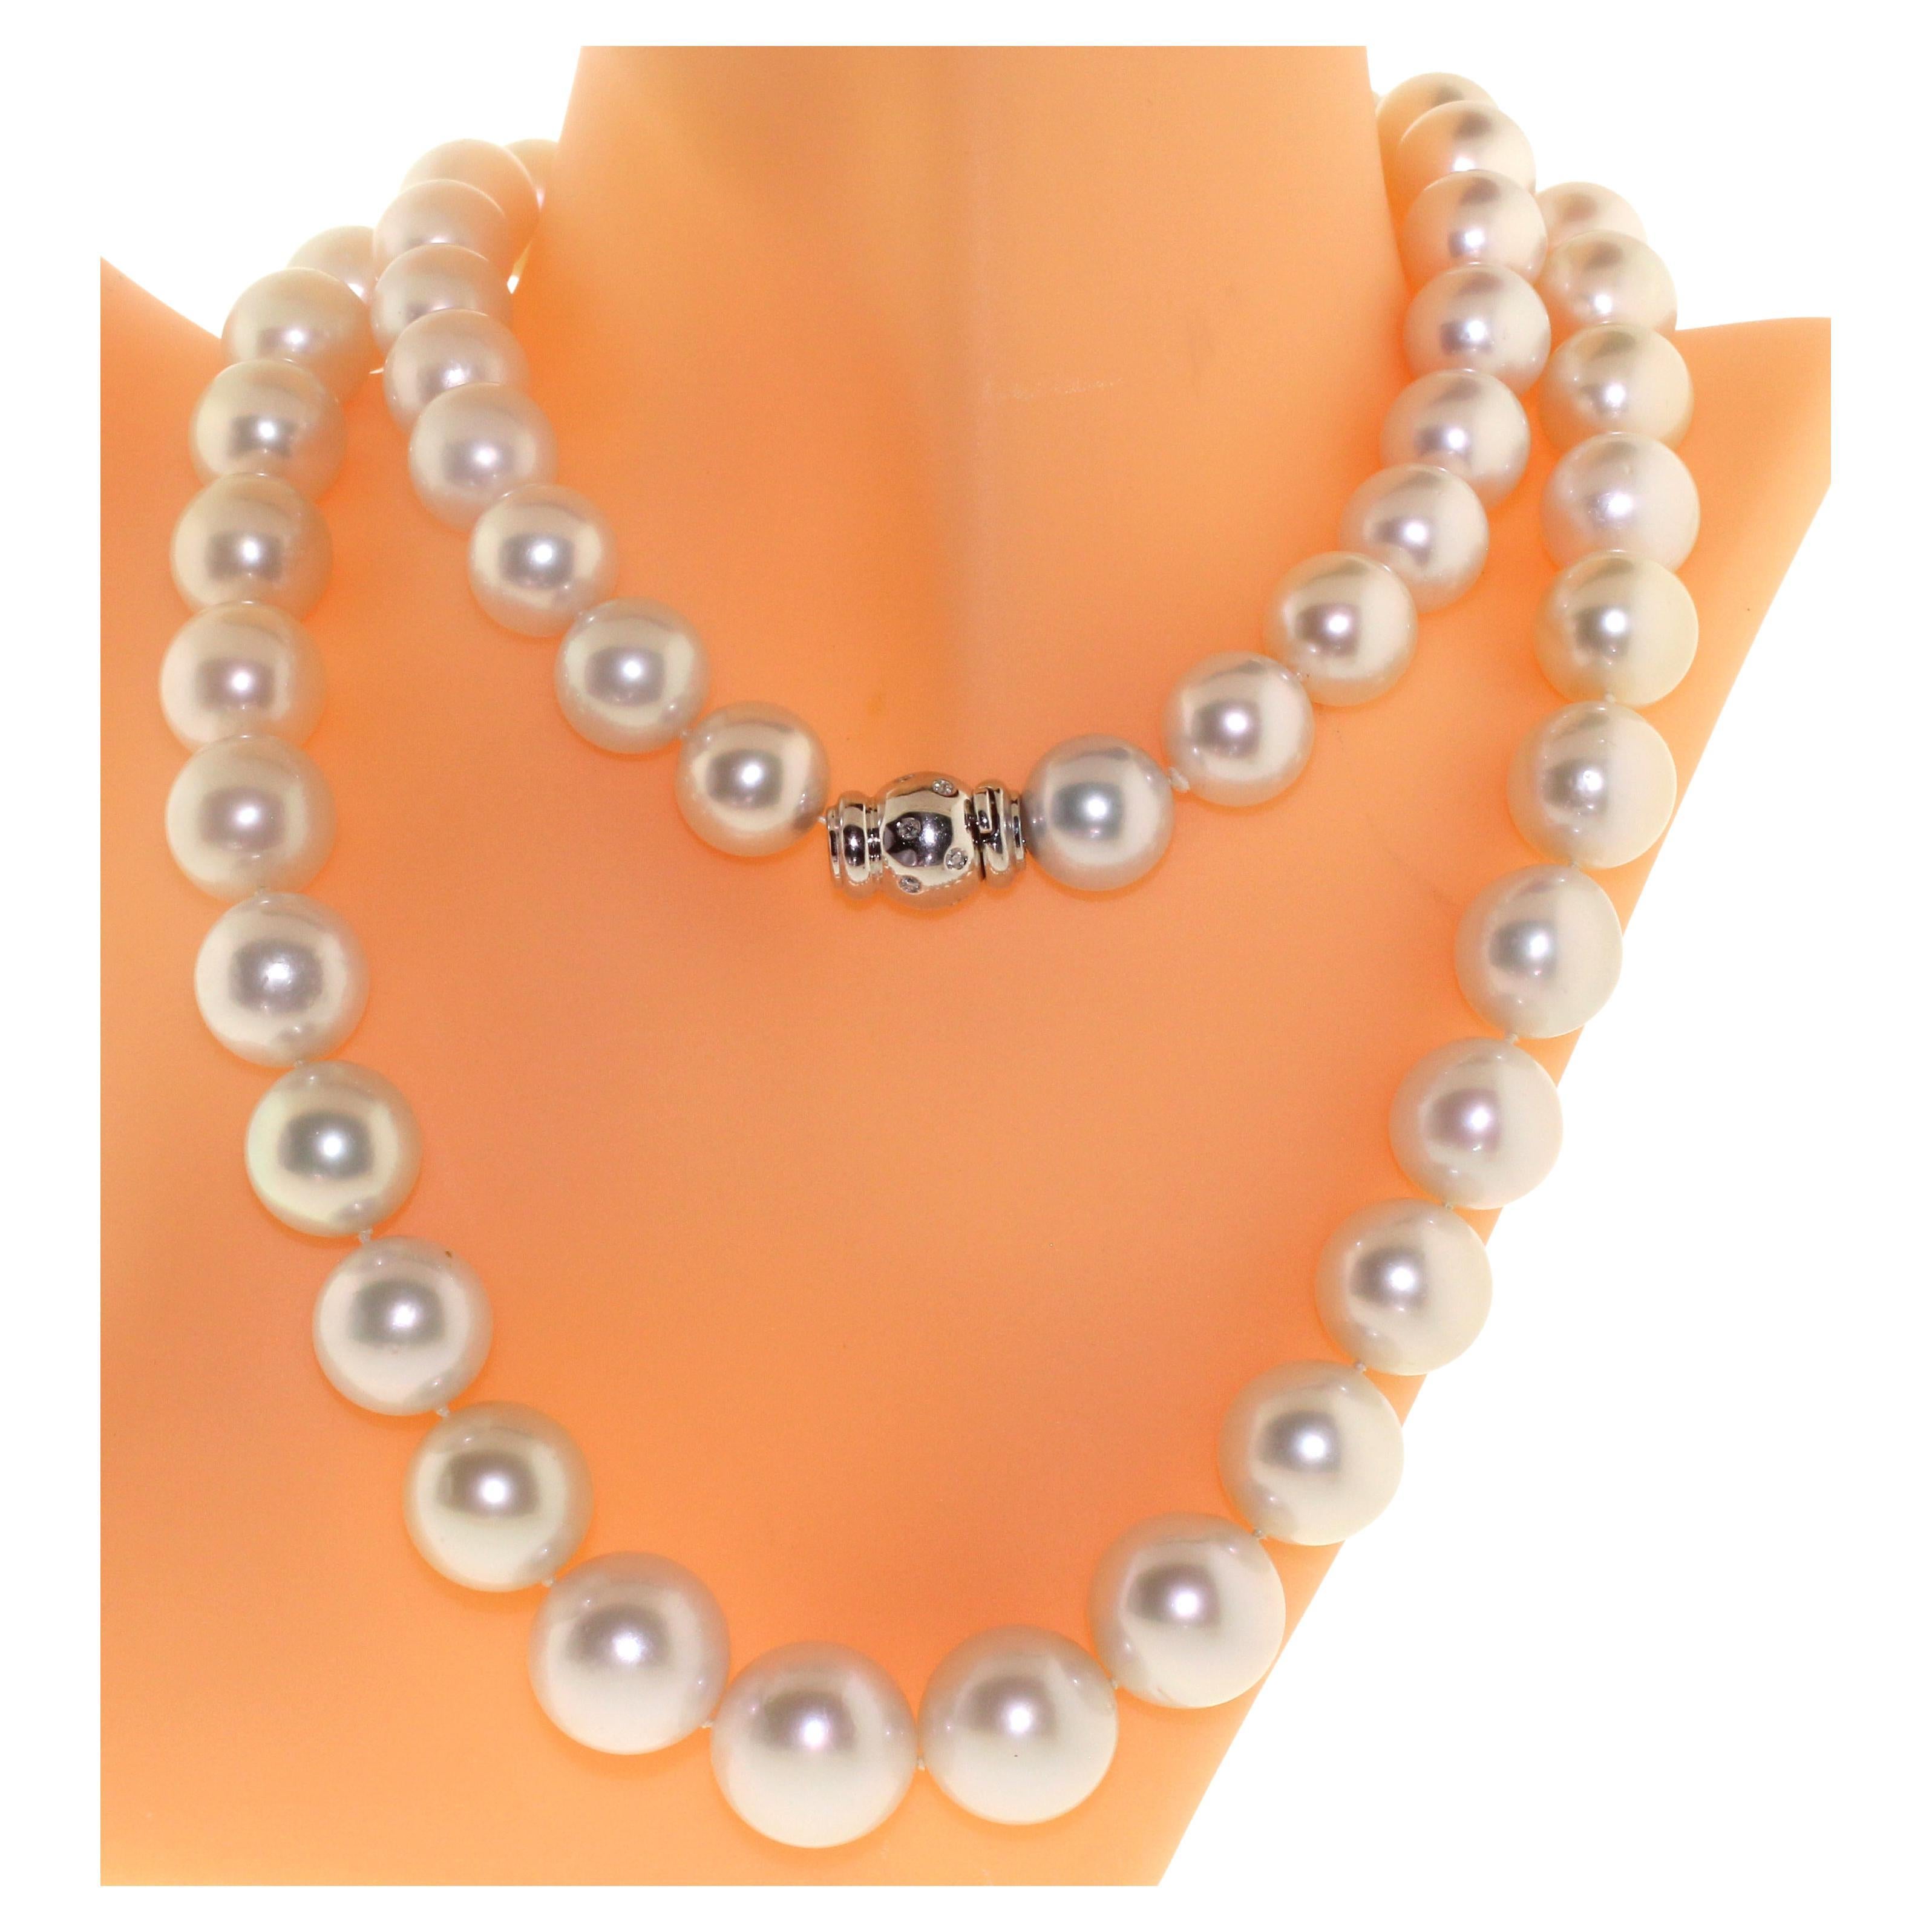 Hakimoto By Jewel Of Ocean 18K South Sea Strand Necklace
18K White Gold With Diamond Clasp
Weight (g): 228
Cultured South Sea Pearl 
Pearl Size: 17X13mm 
Pearl Shape: Round 
Body color: White 
Orient: Very Good
Luster: Very Good 
Surface: Clean